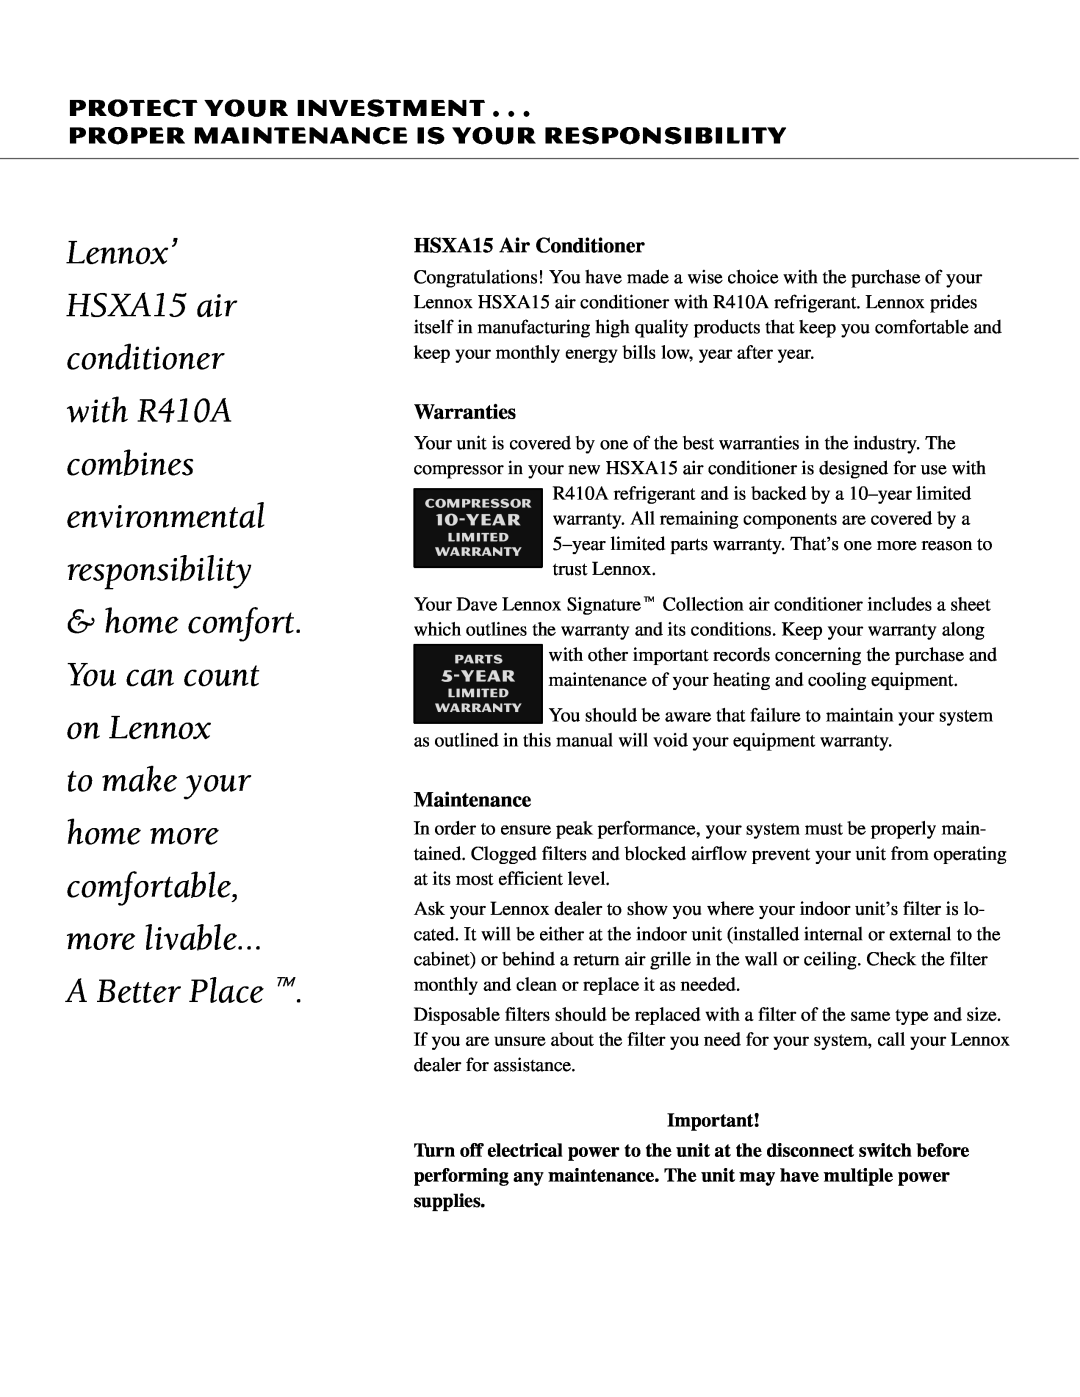 Lennox International Inc HSXA15 Air Conditioner, Warranties, Maintenance, A Better Place t, Protect Your Investment 